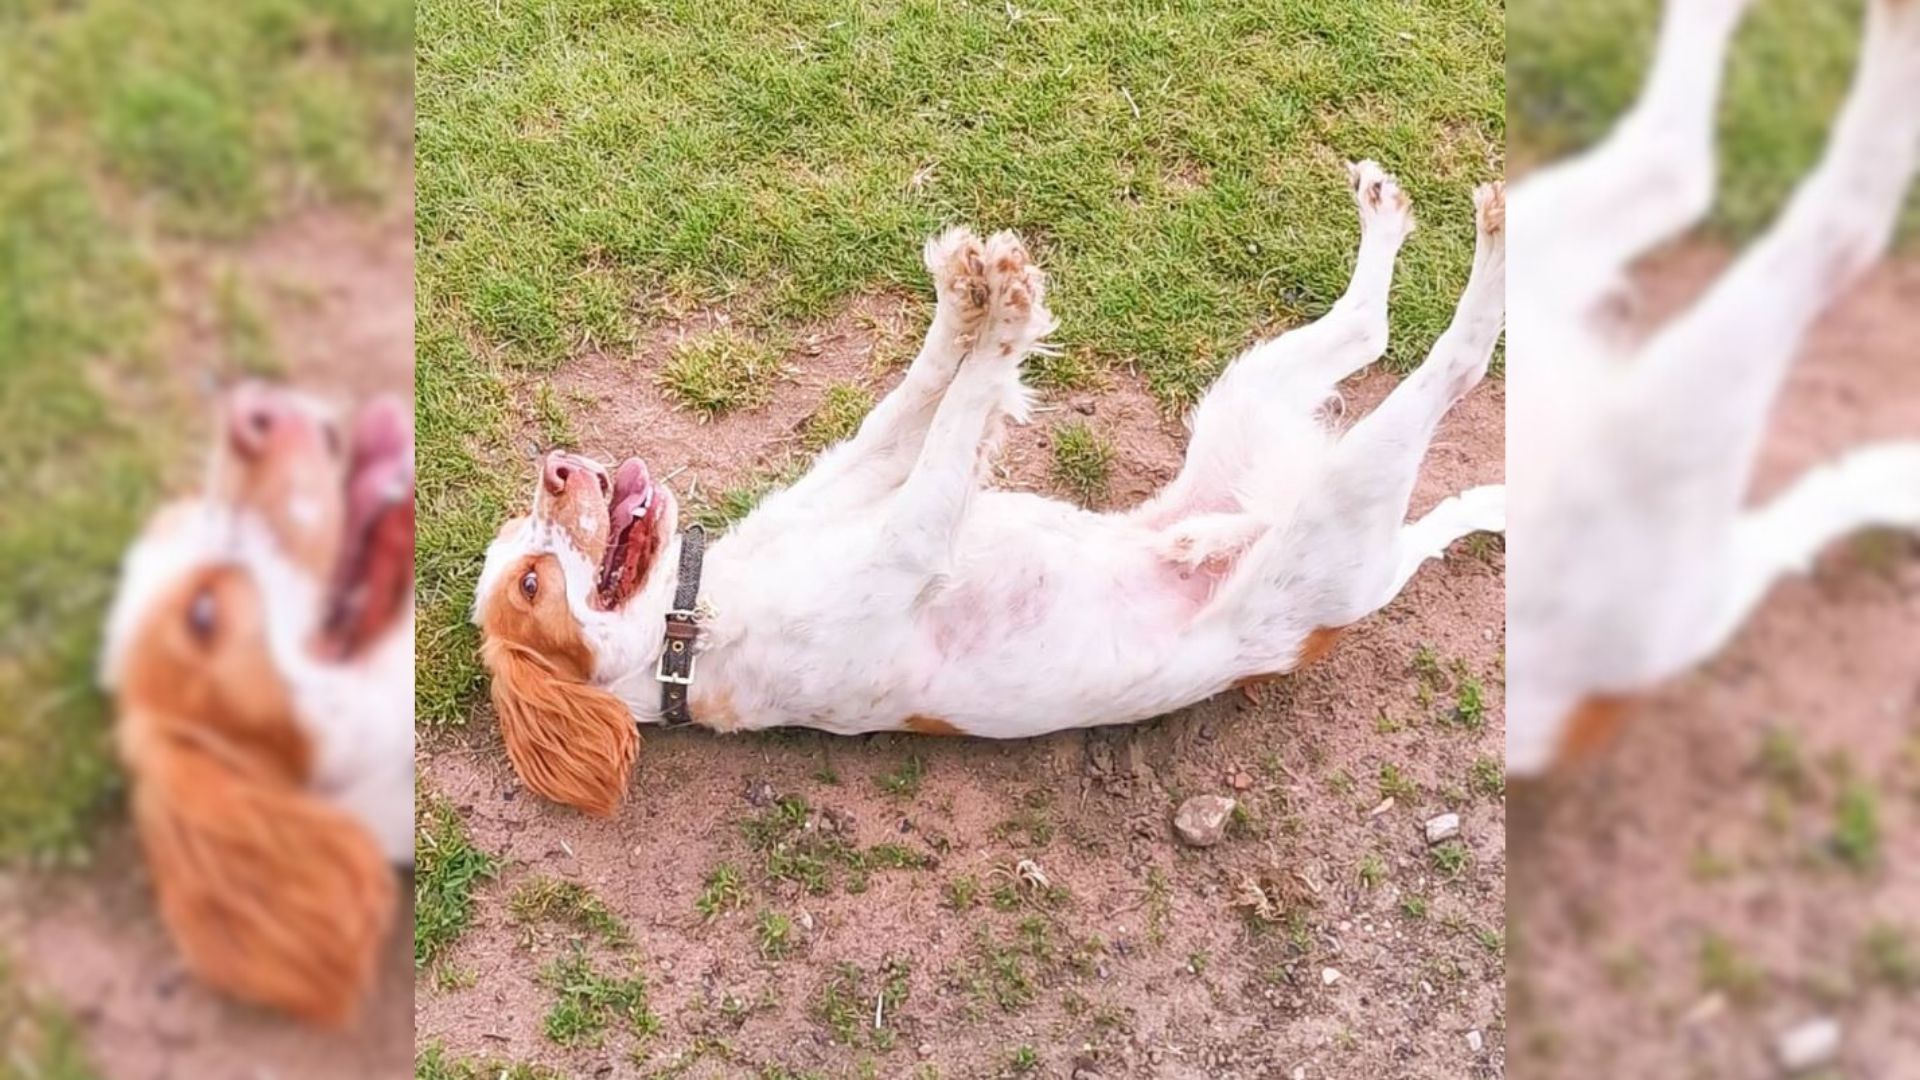 Meet One-Of-A-Kind Doggo That Faints Every Time He Gets Excited